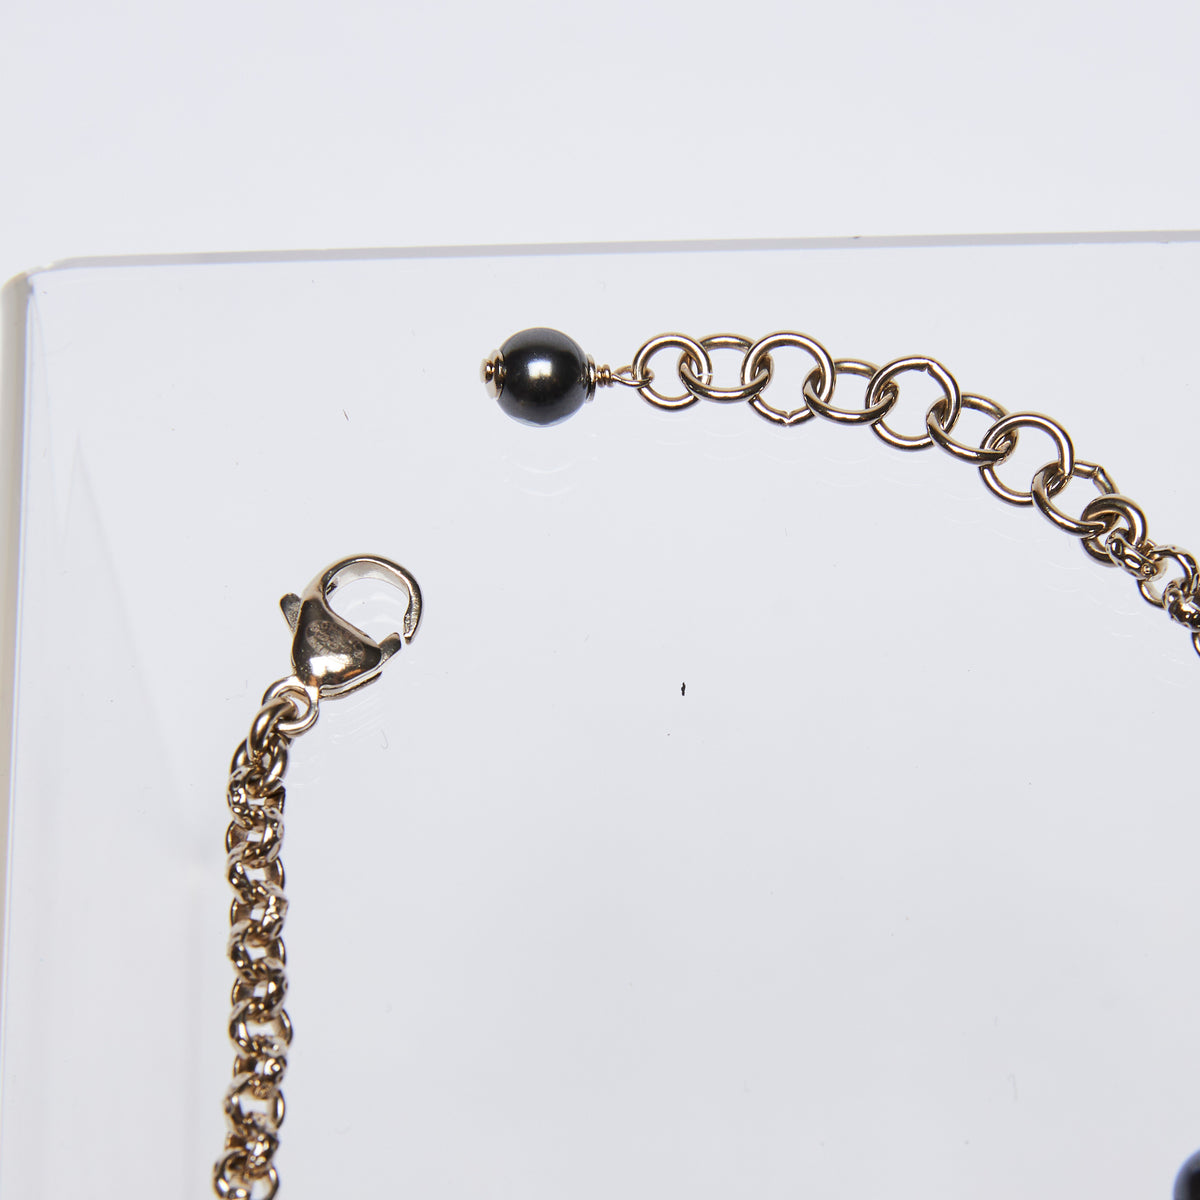 Excellent Pre-Loved Dark Silver Mini Pearls and Crystal Embellished Hear Motif Chain Bracelet(clasp)